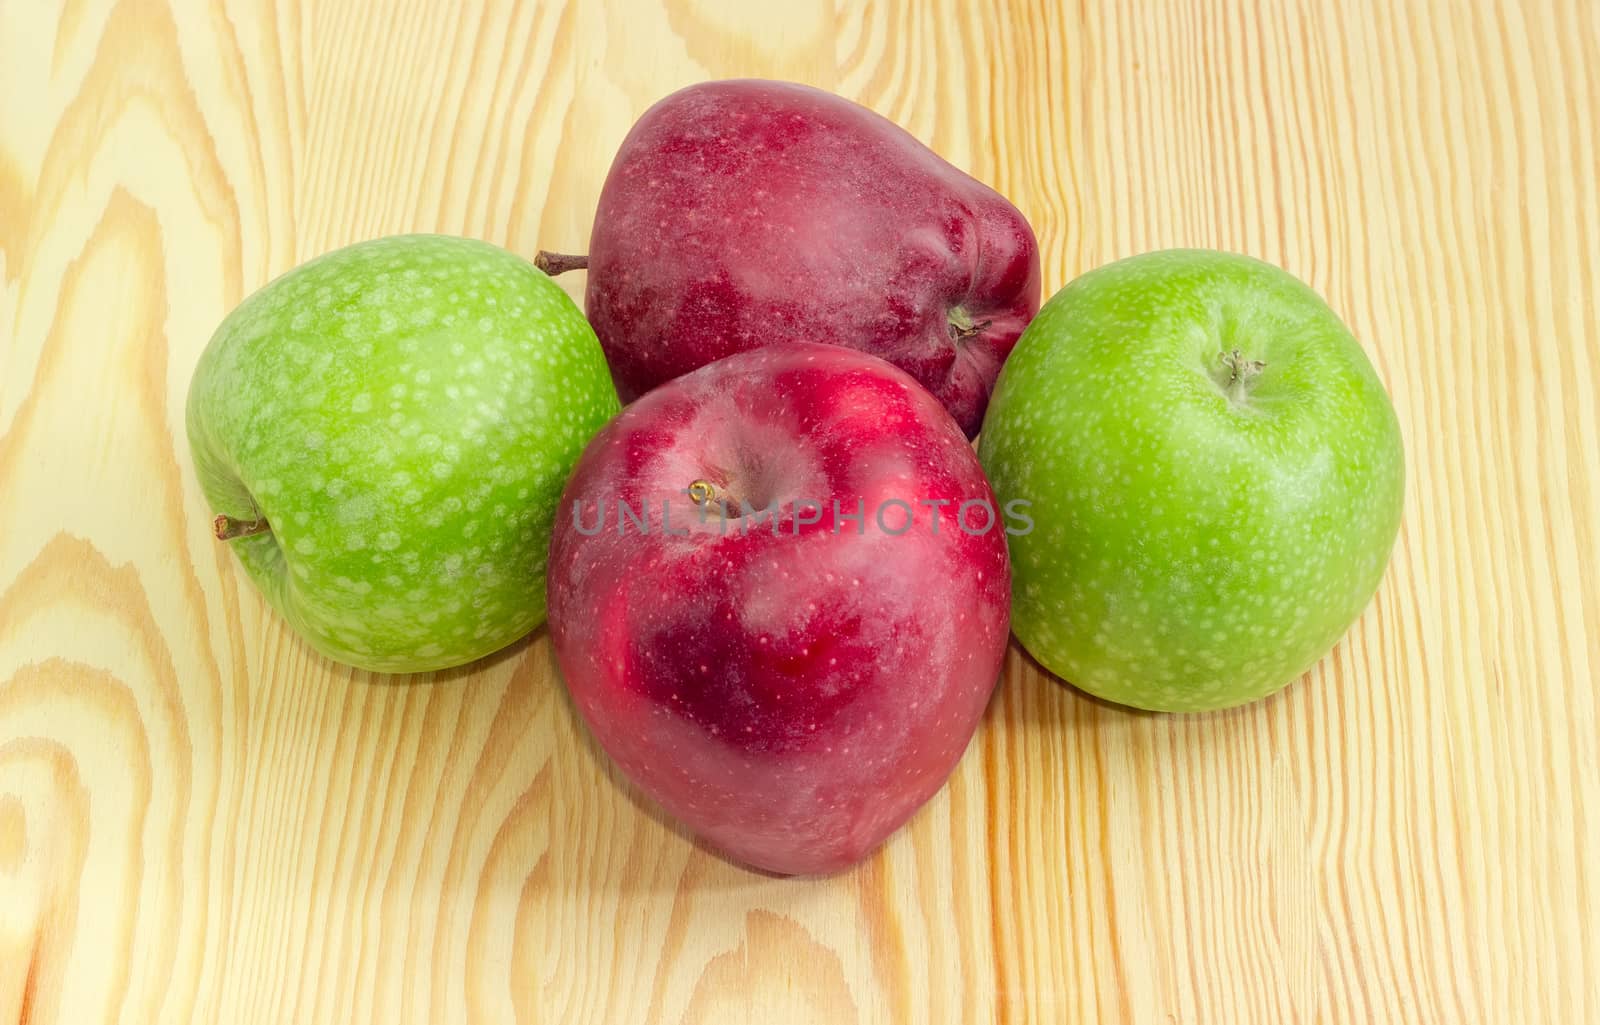 Two green and two dark red freshly harvested ripe apples on a light wooden surface
